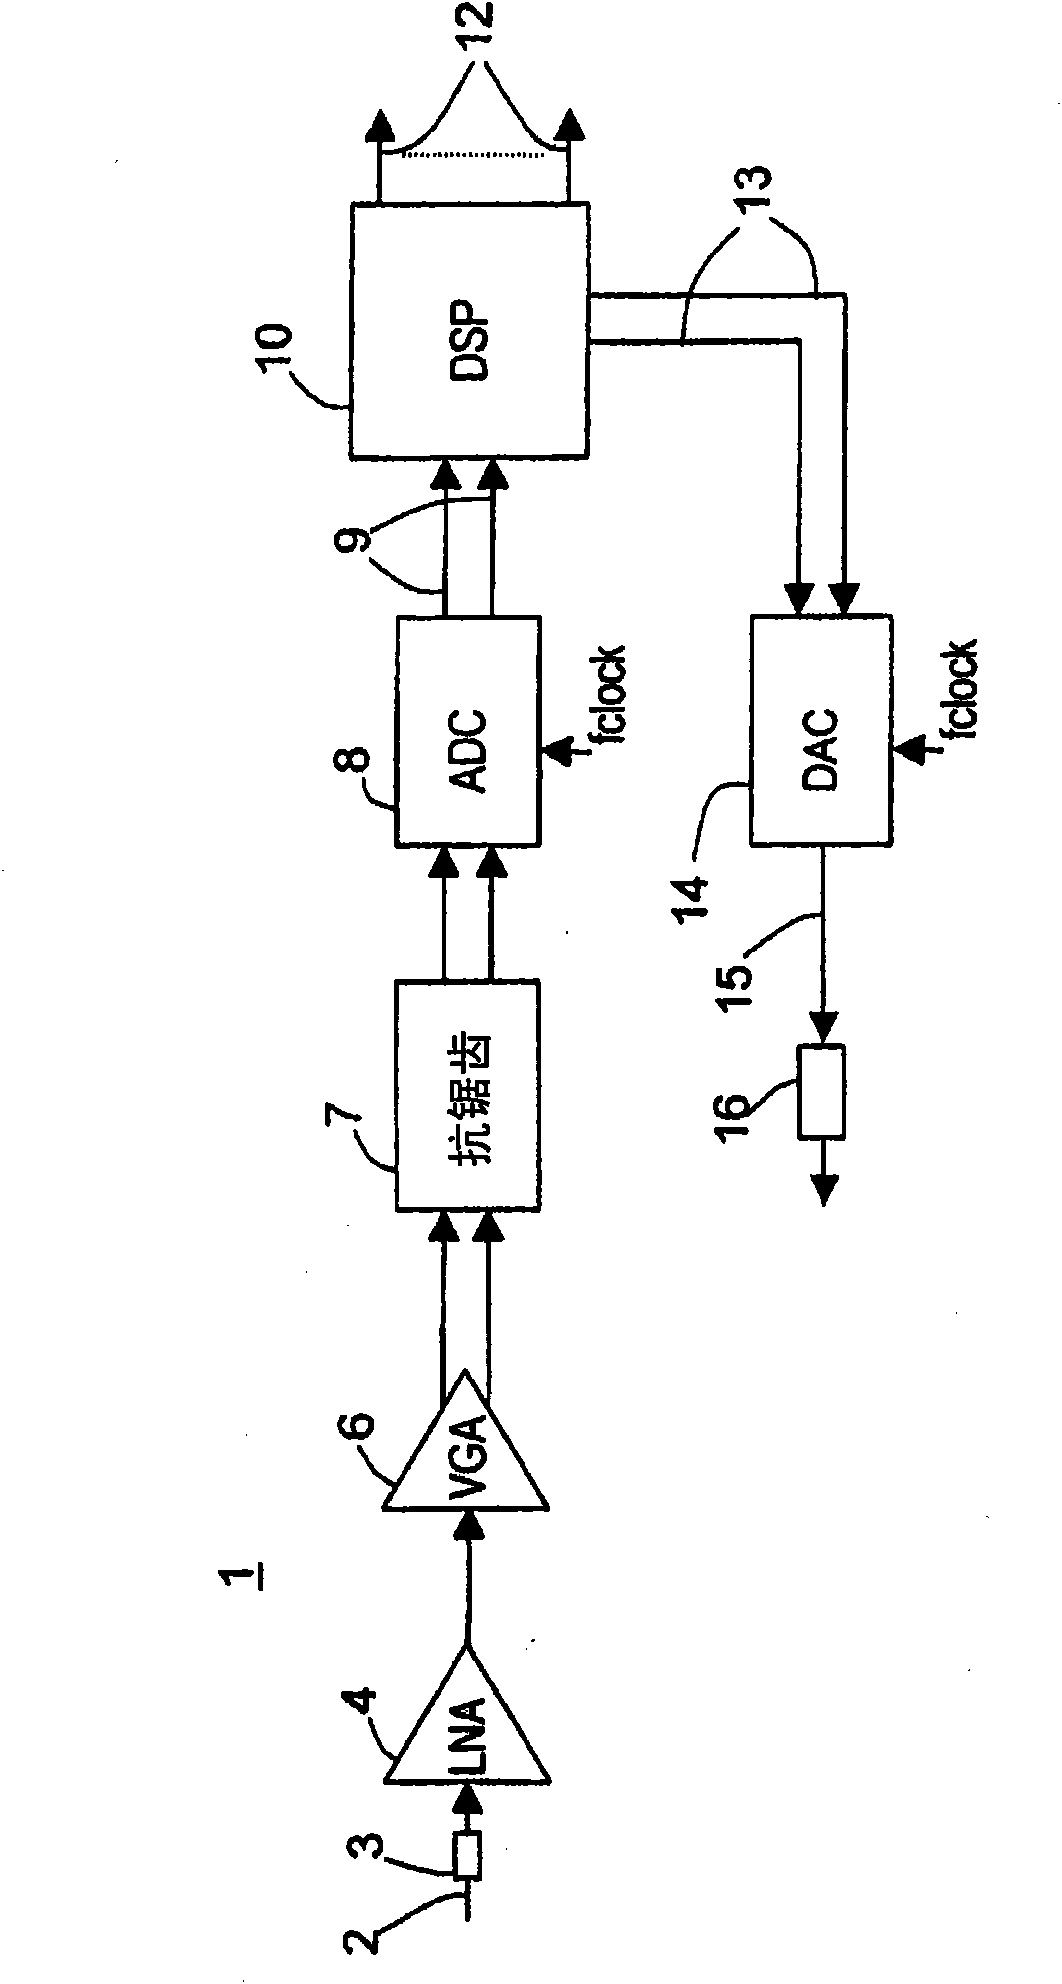 Device for receiving a RF signal with loop-through output and method for looping a RF input signal through a device for receiving RF signals